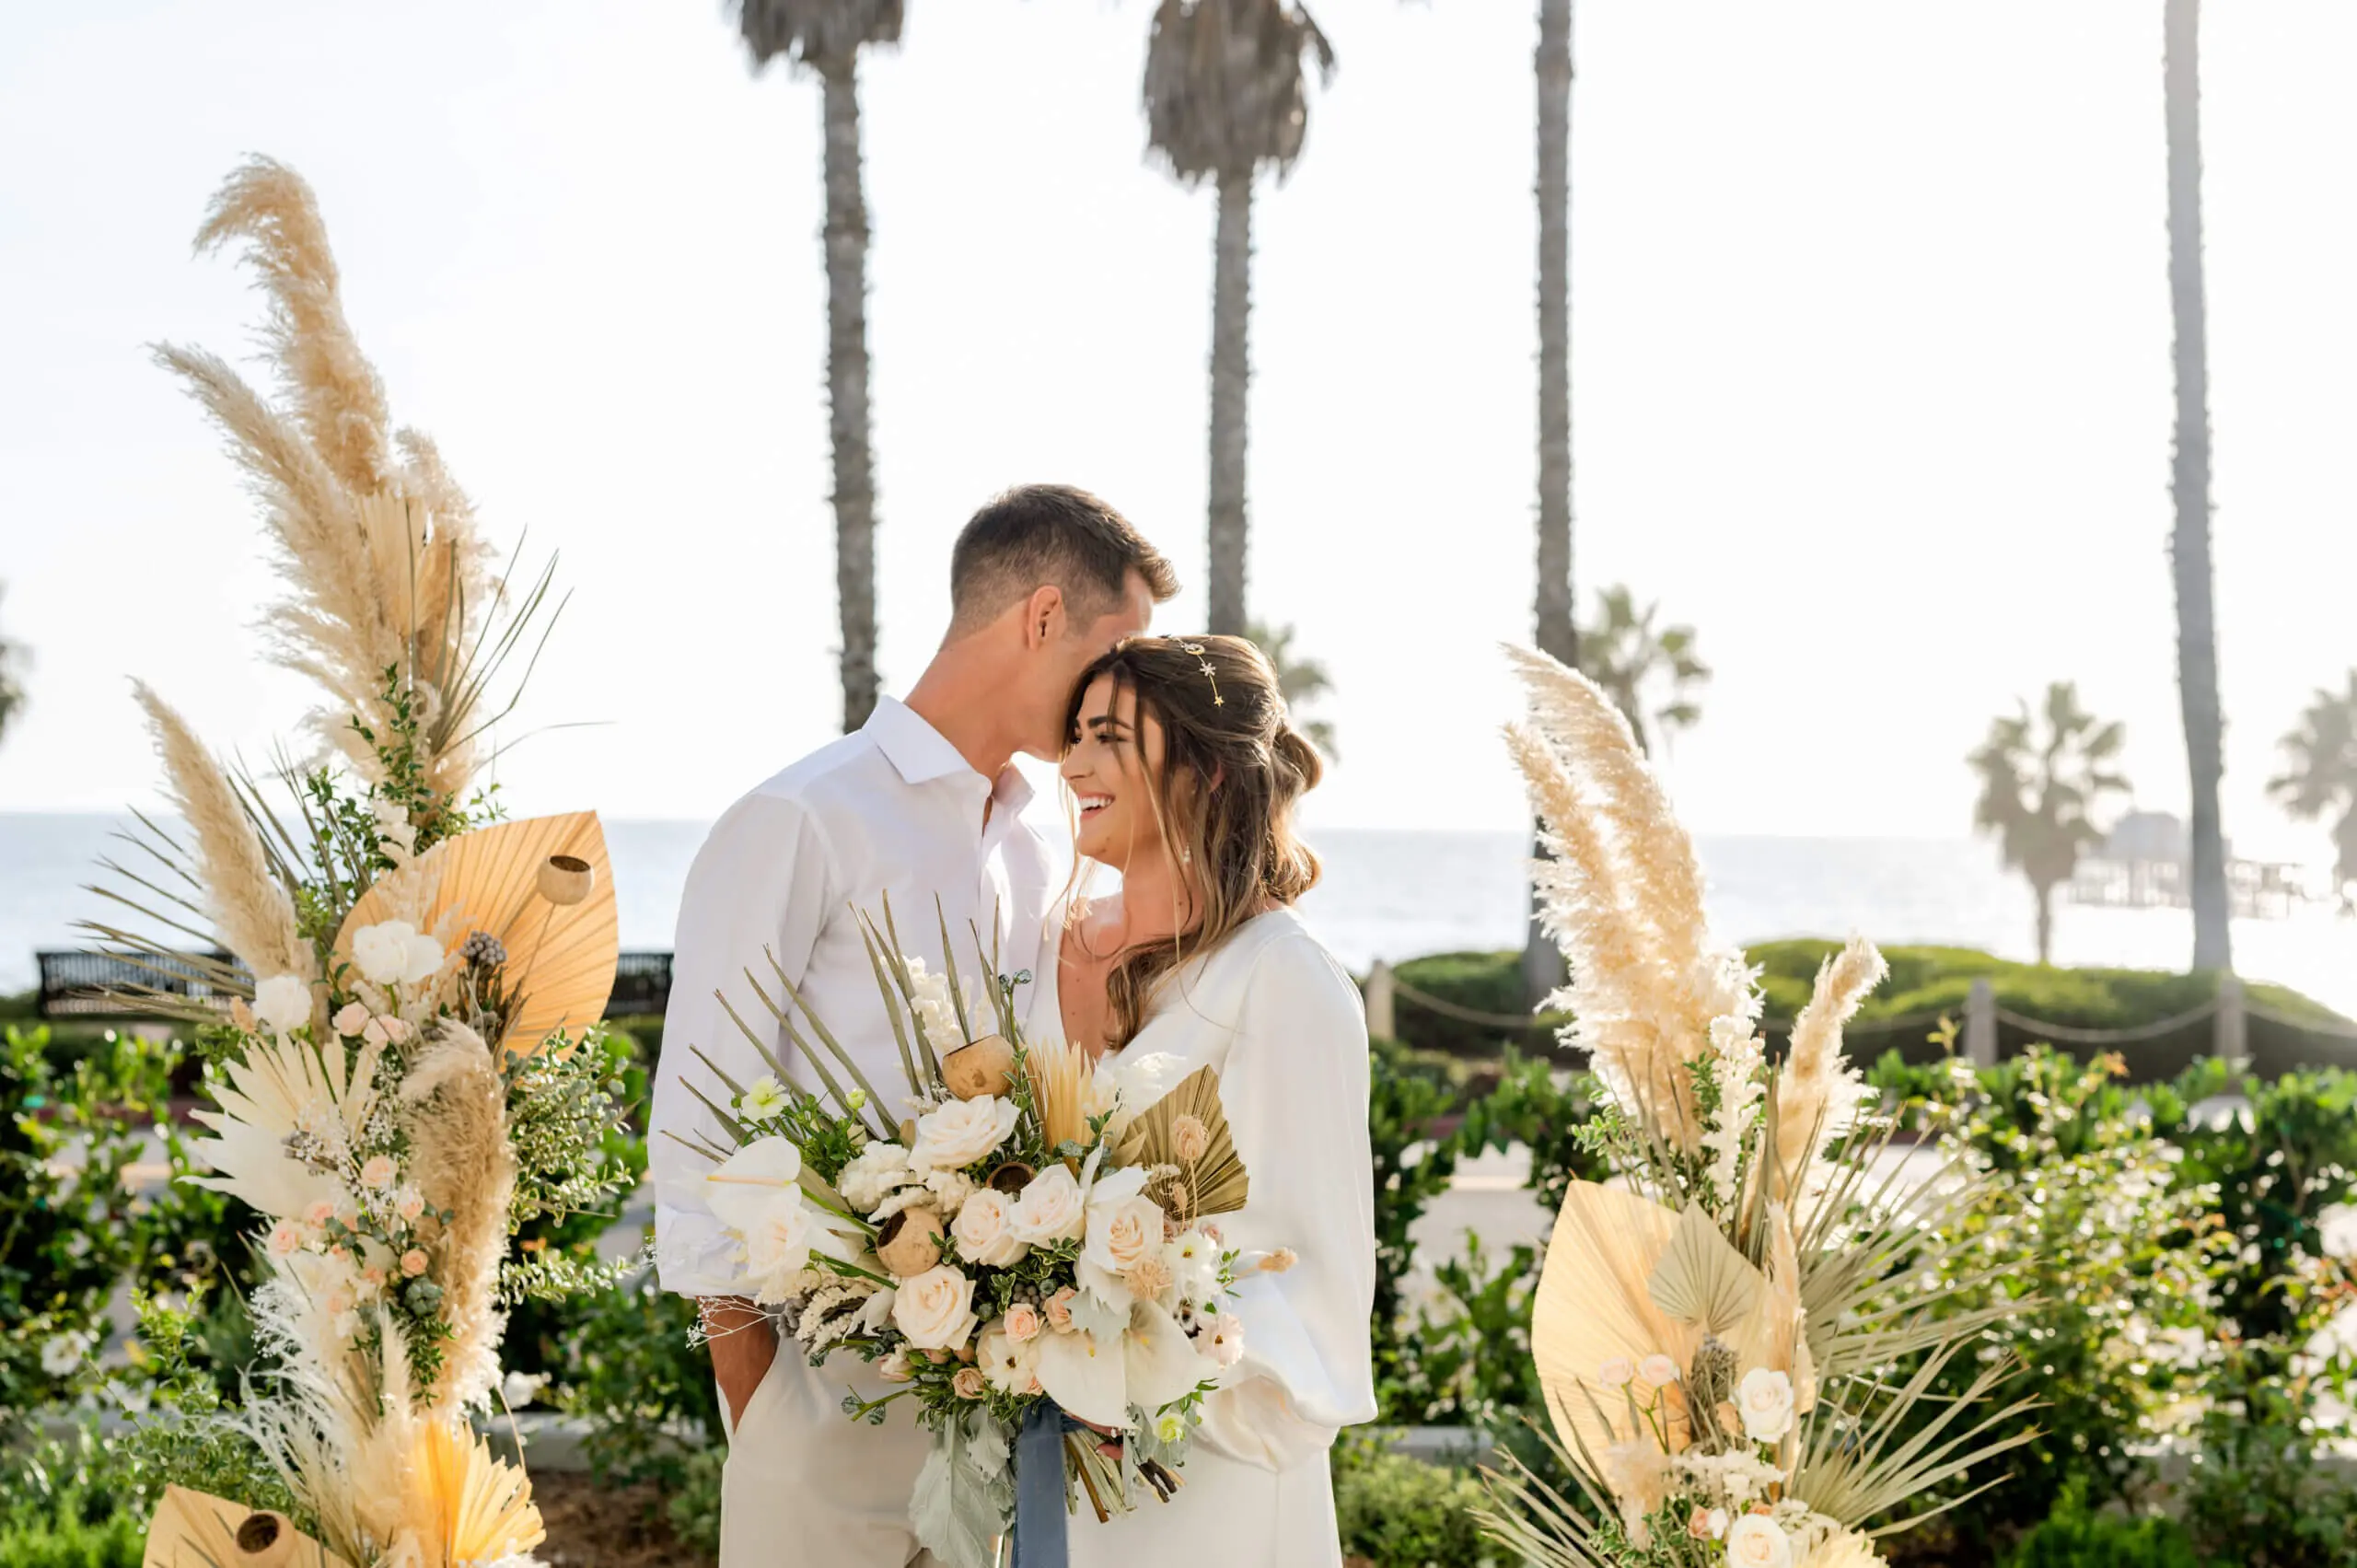 2022 SOUTHERN CALIFORNIA WEDDING TRENDS